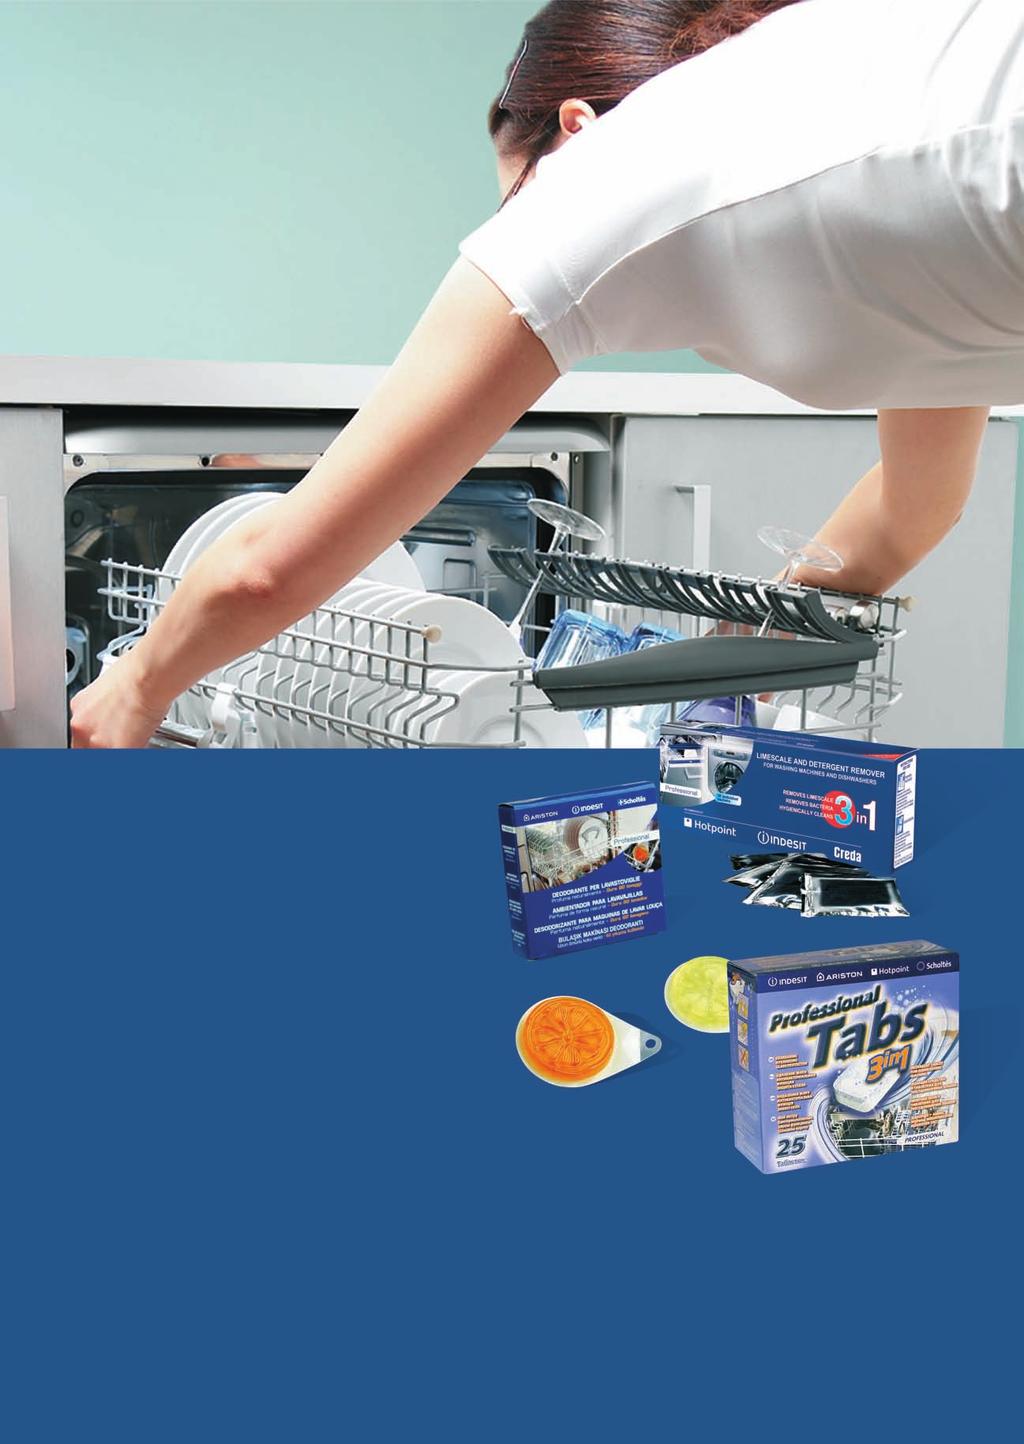 Dishwashers Do you know how to get the best cleaning results from dishwashers?